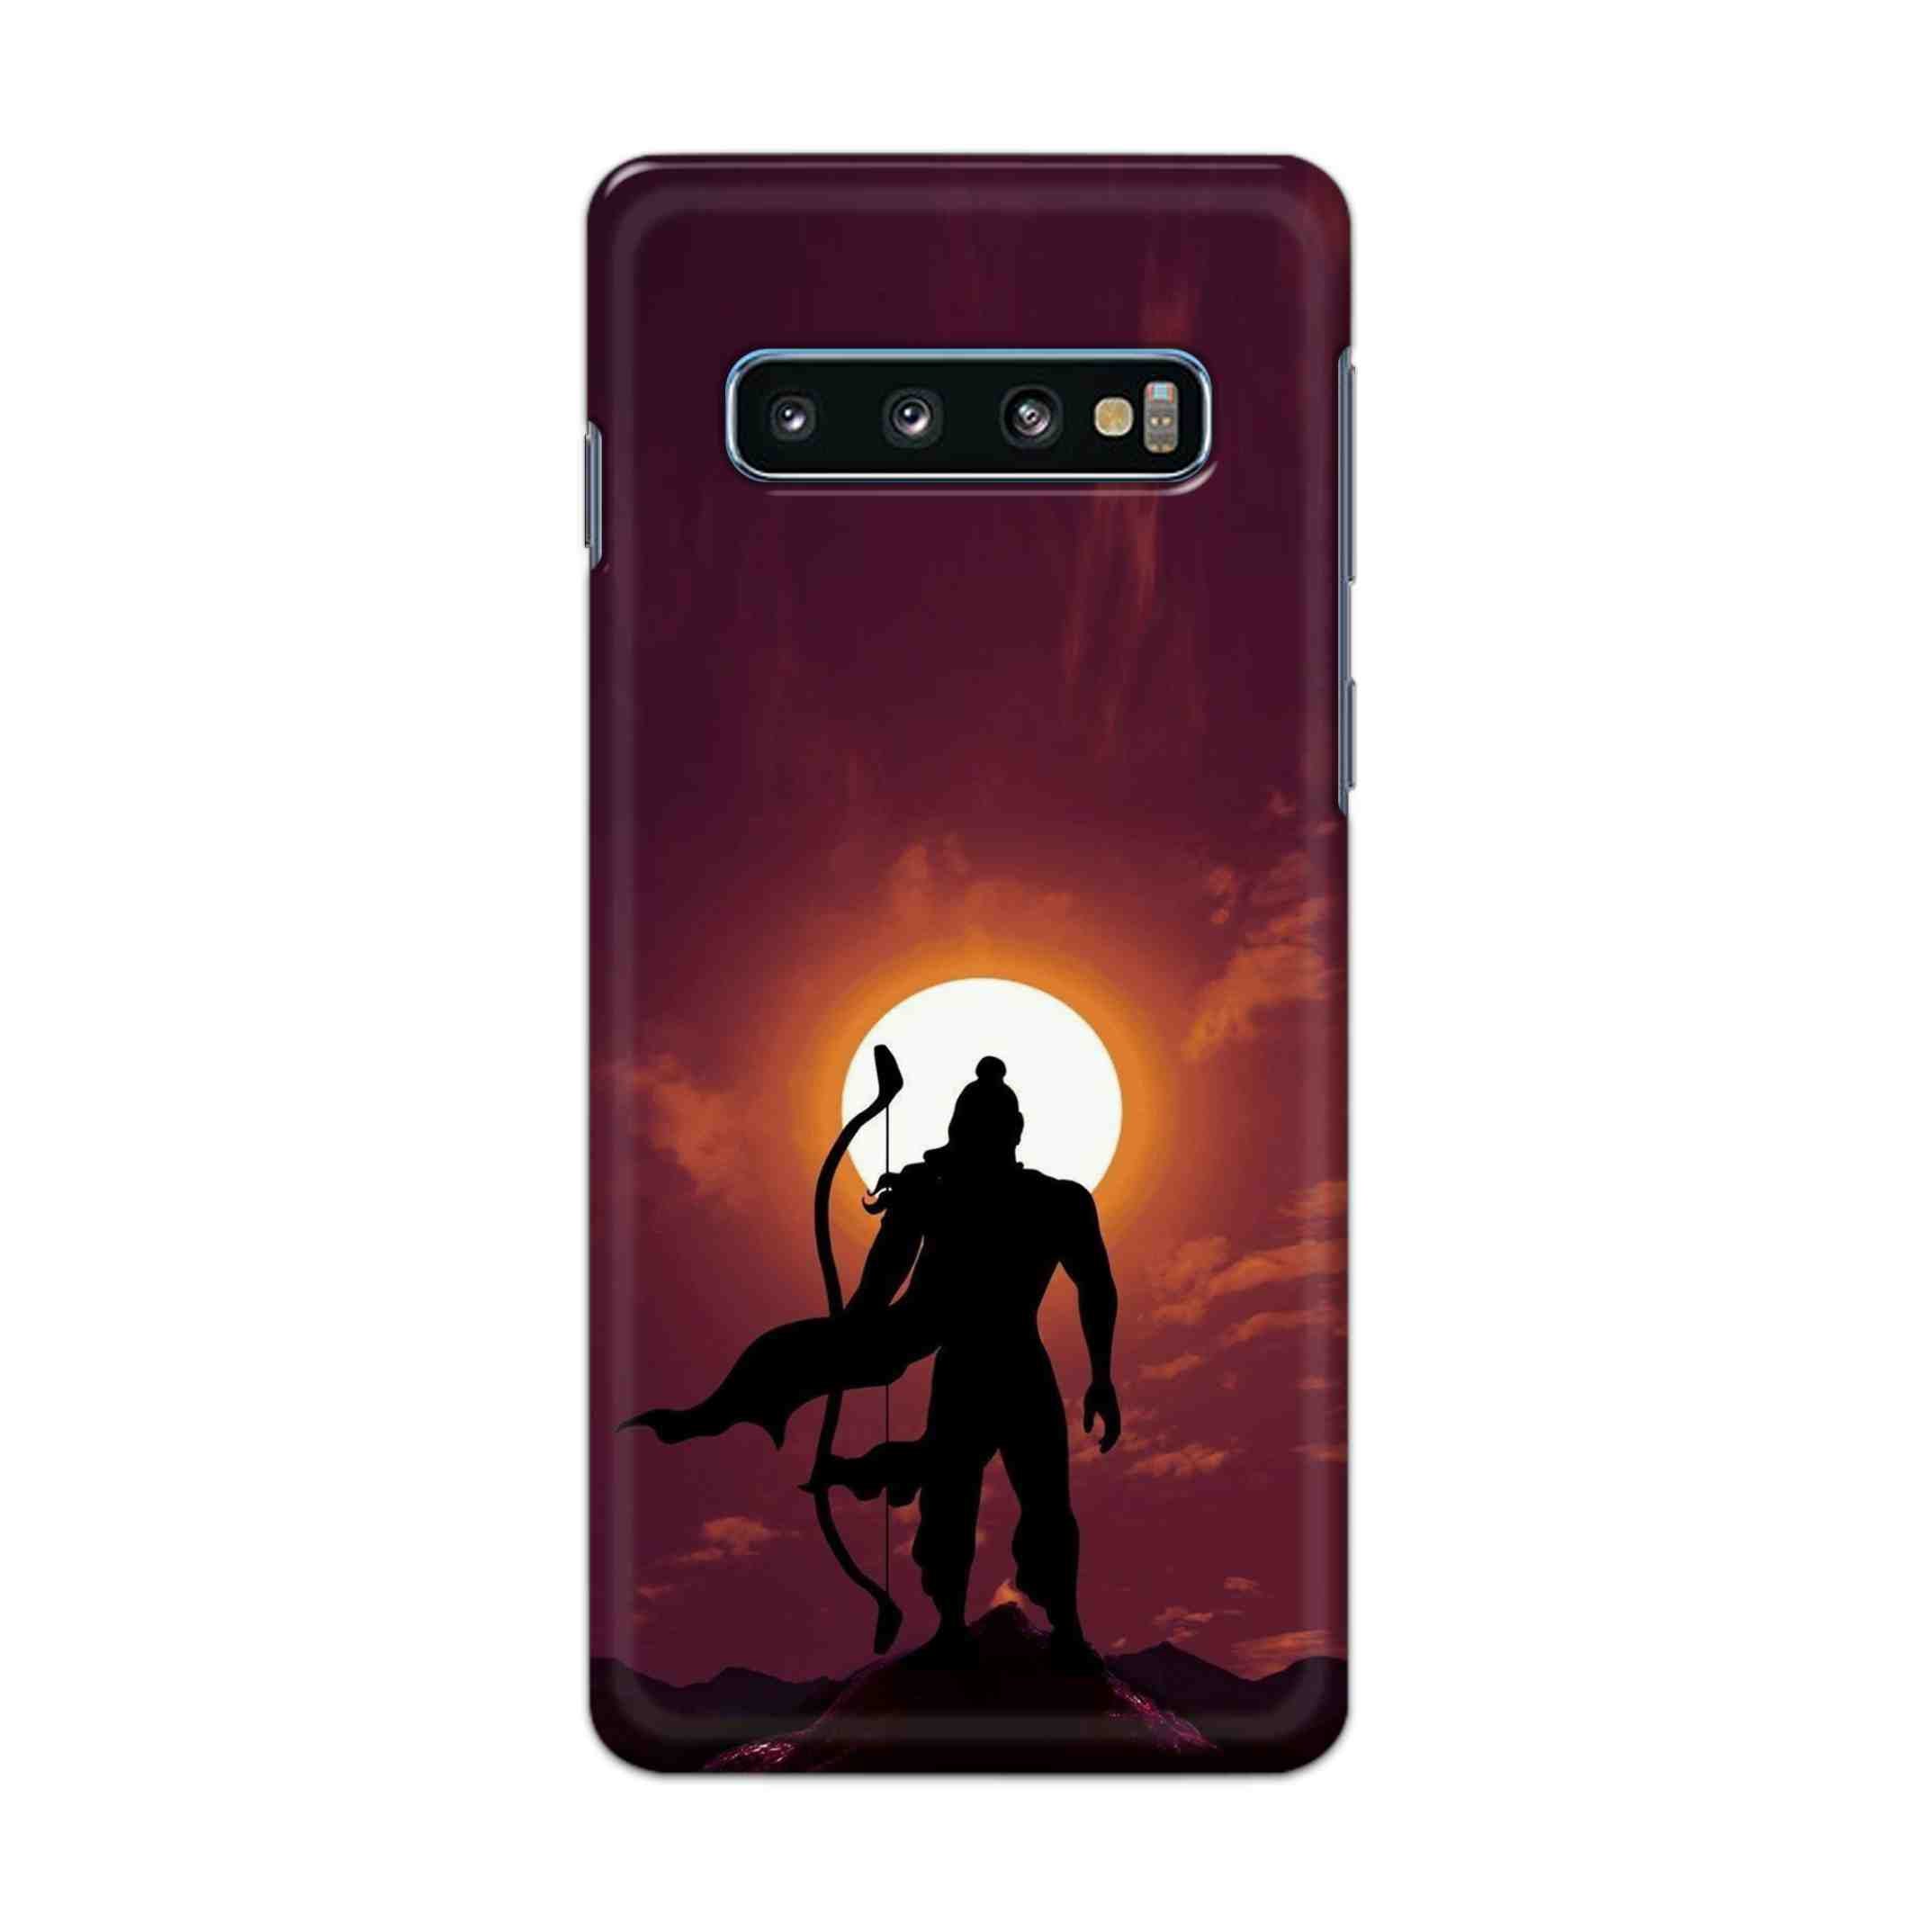 Buy Ram Hard Back Mobile Phone Case Cover For Samsung Galaxy S10 Plus Online